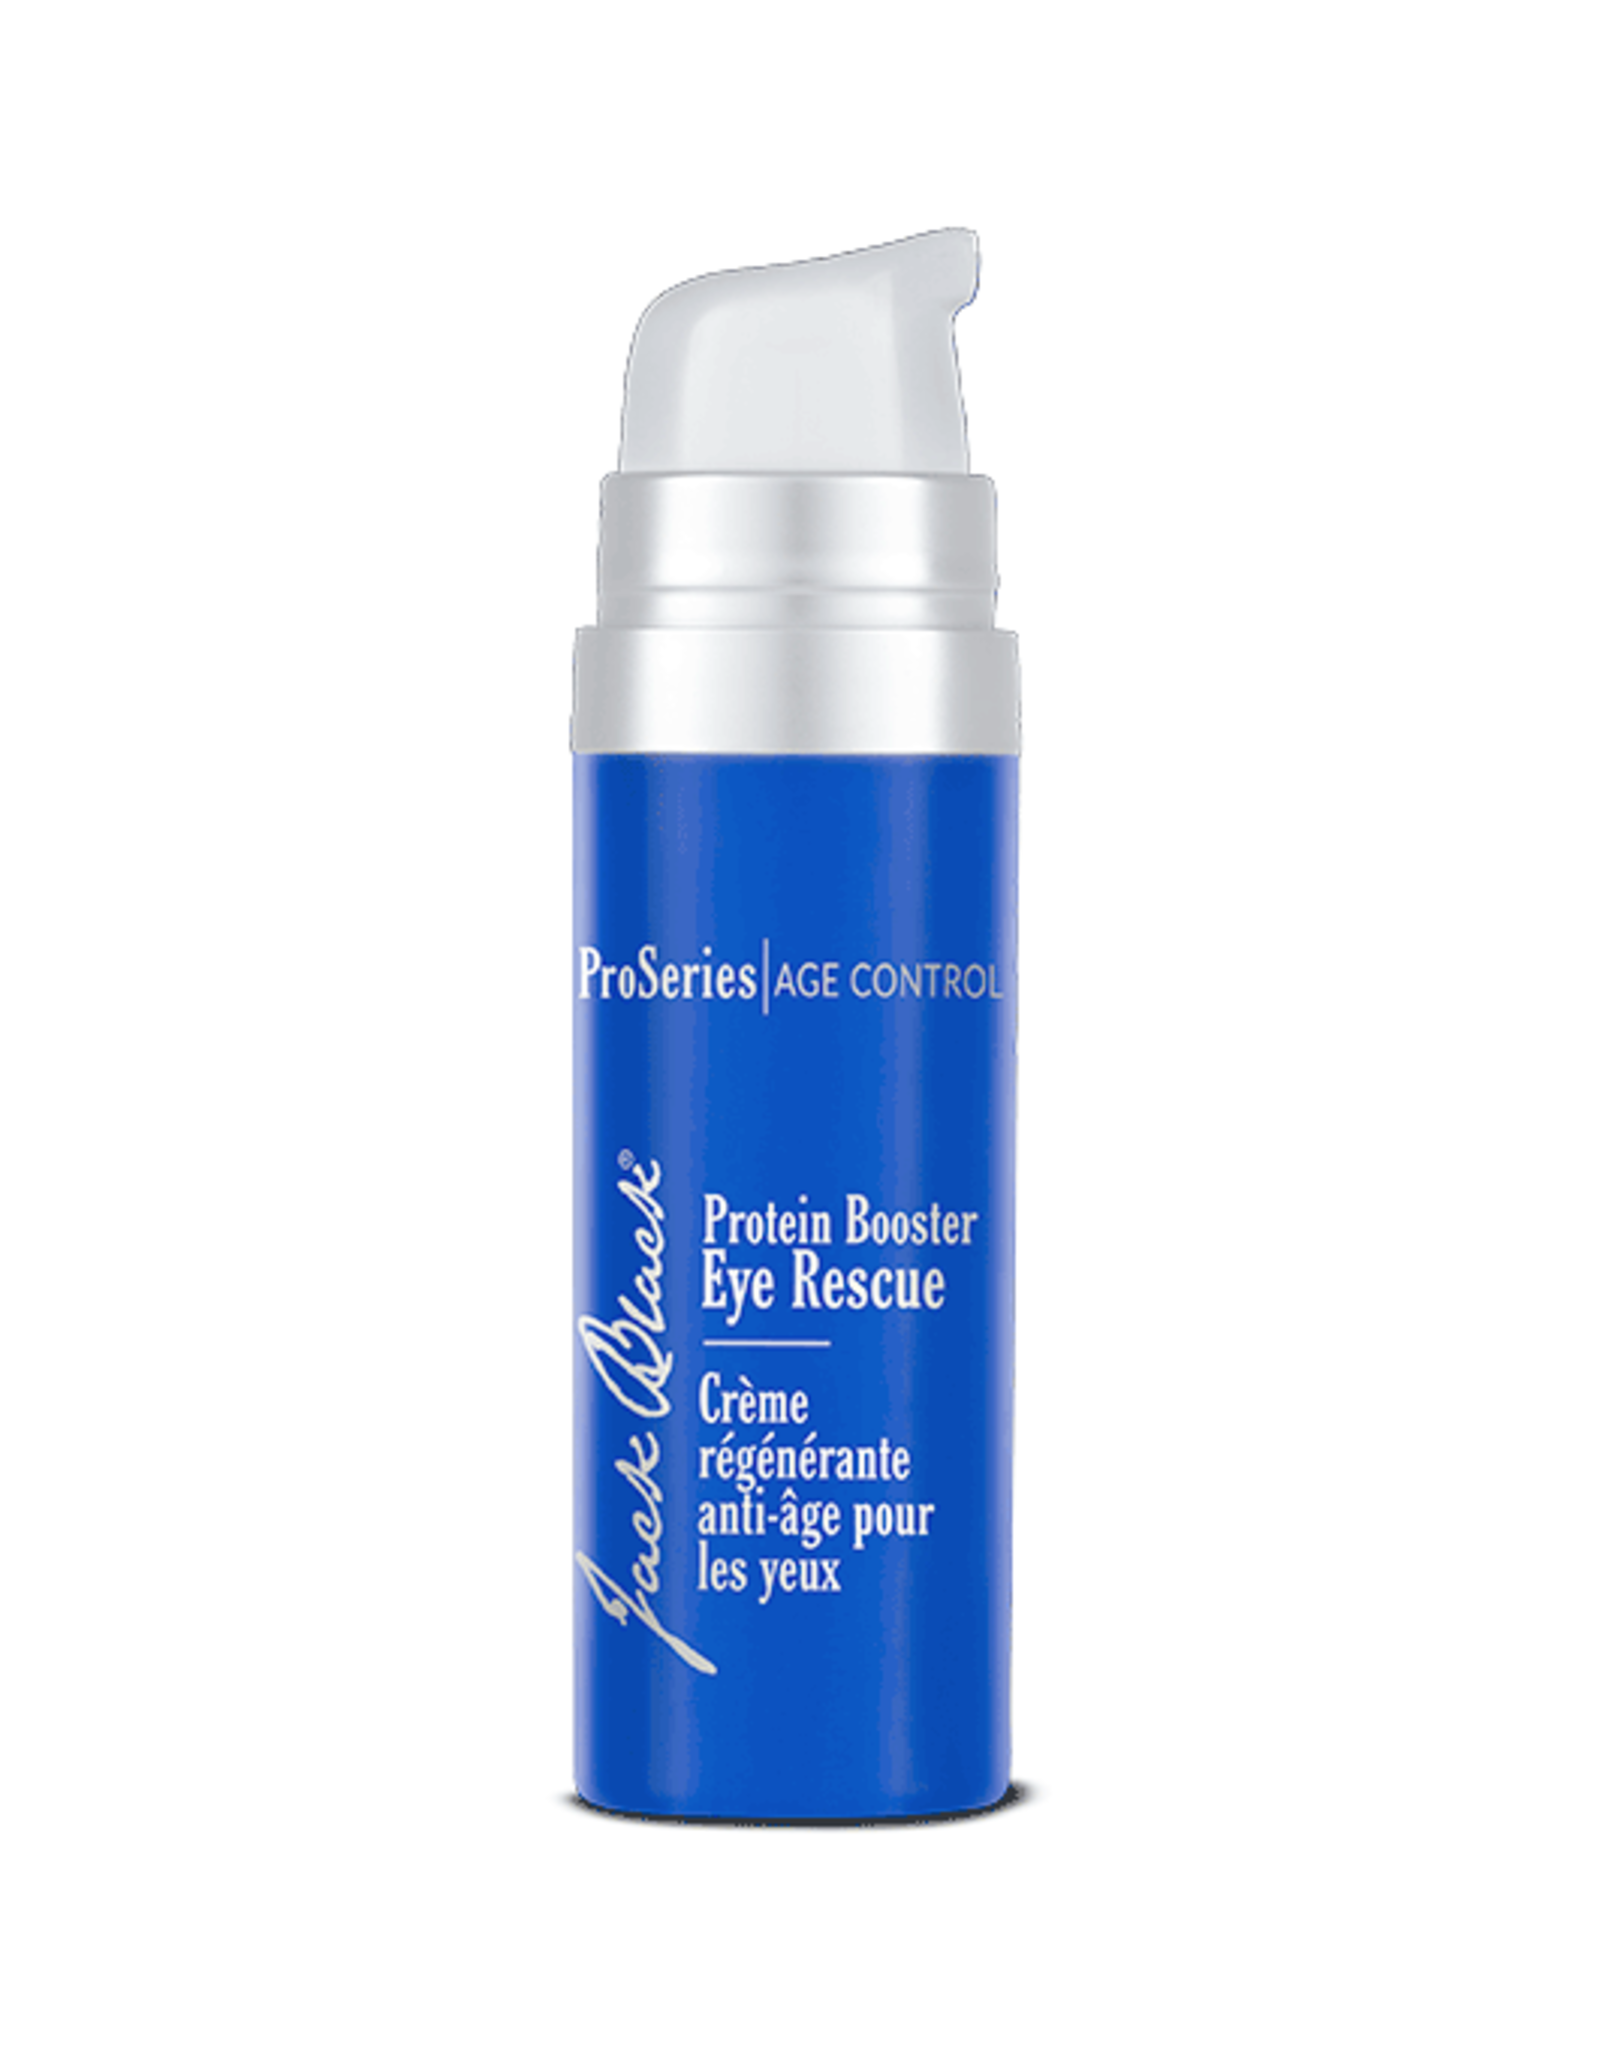 Protein Booster Eye Rescue Pro Series Age Control